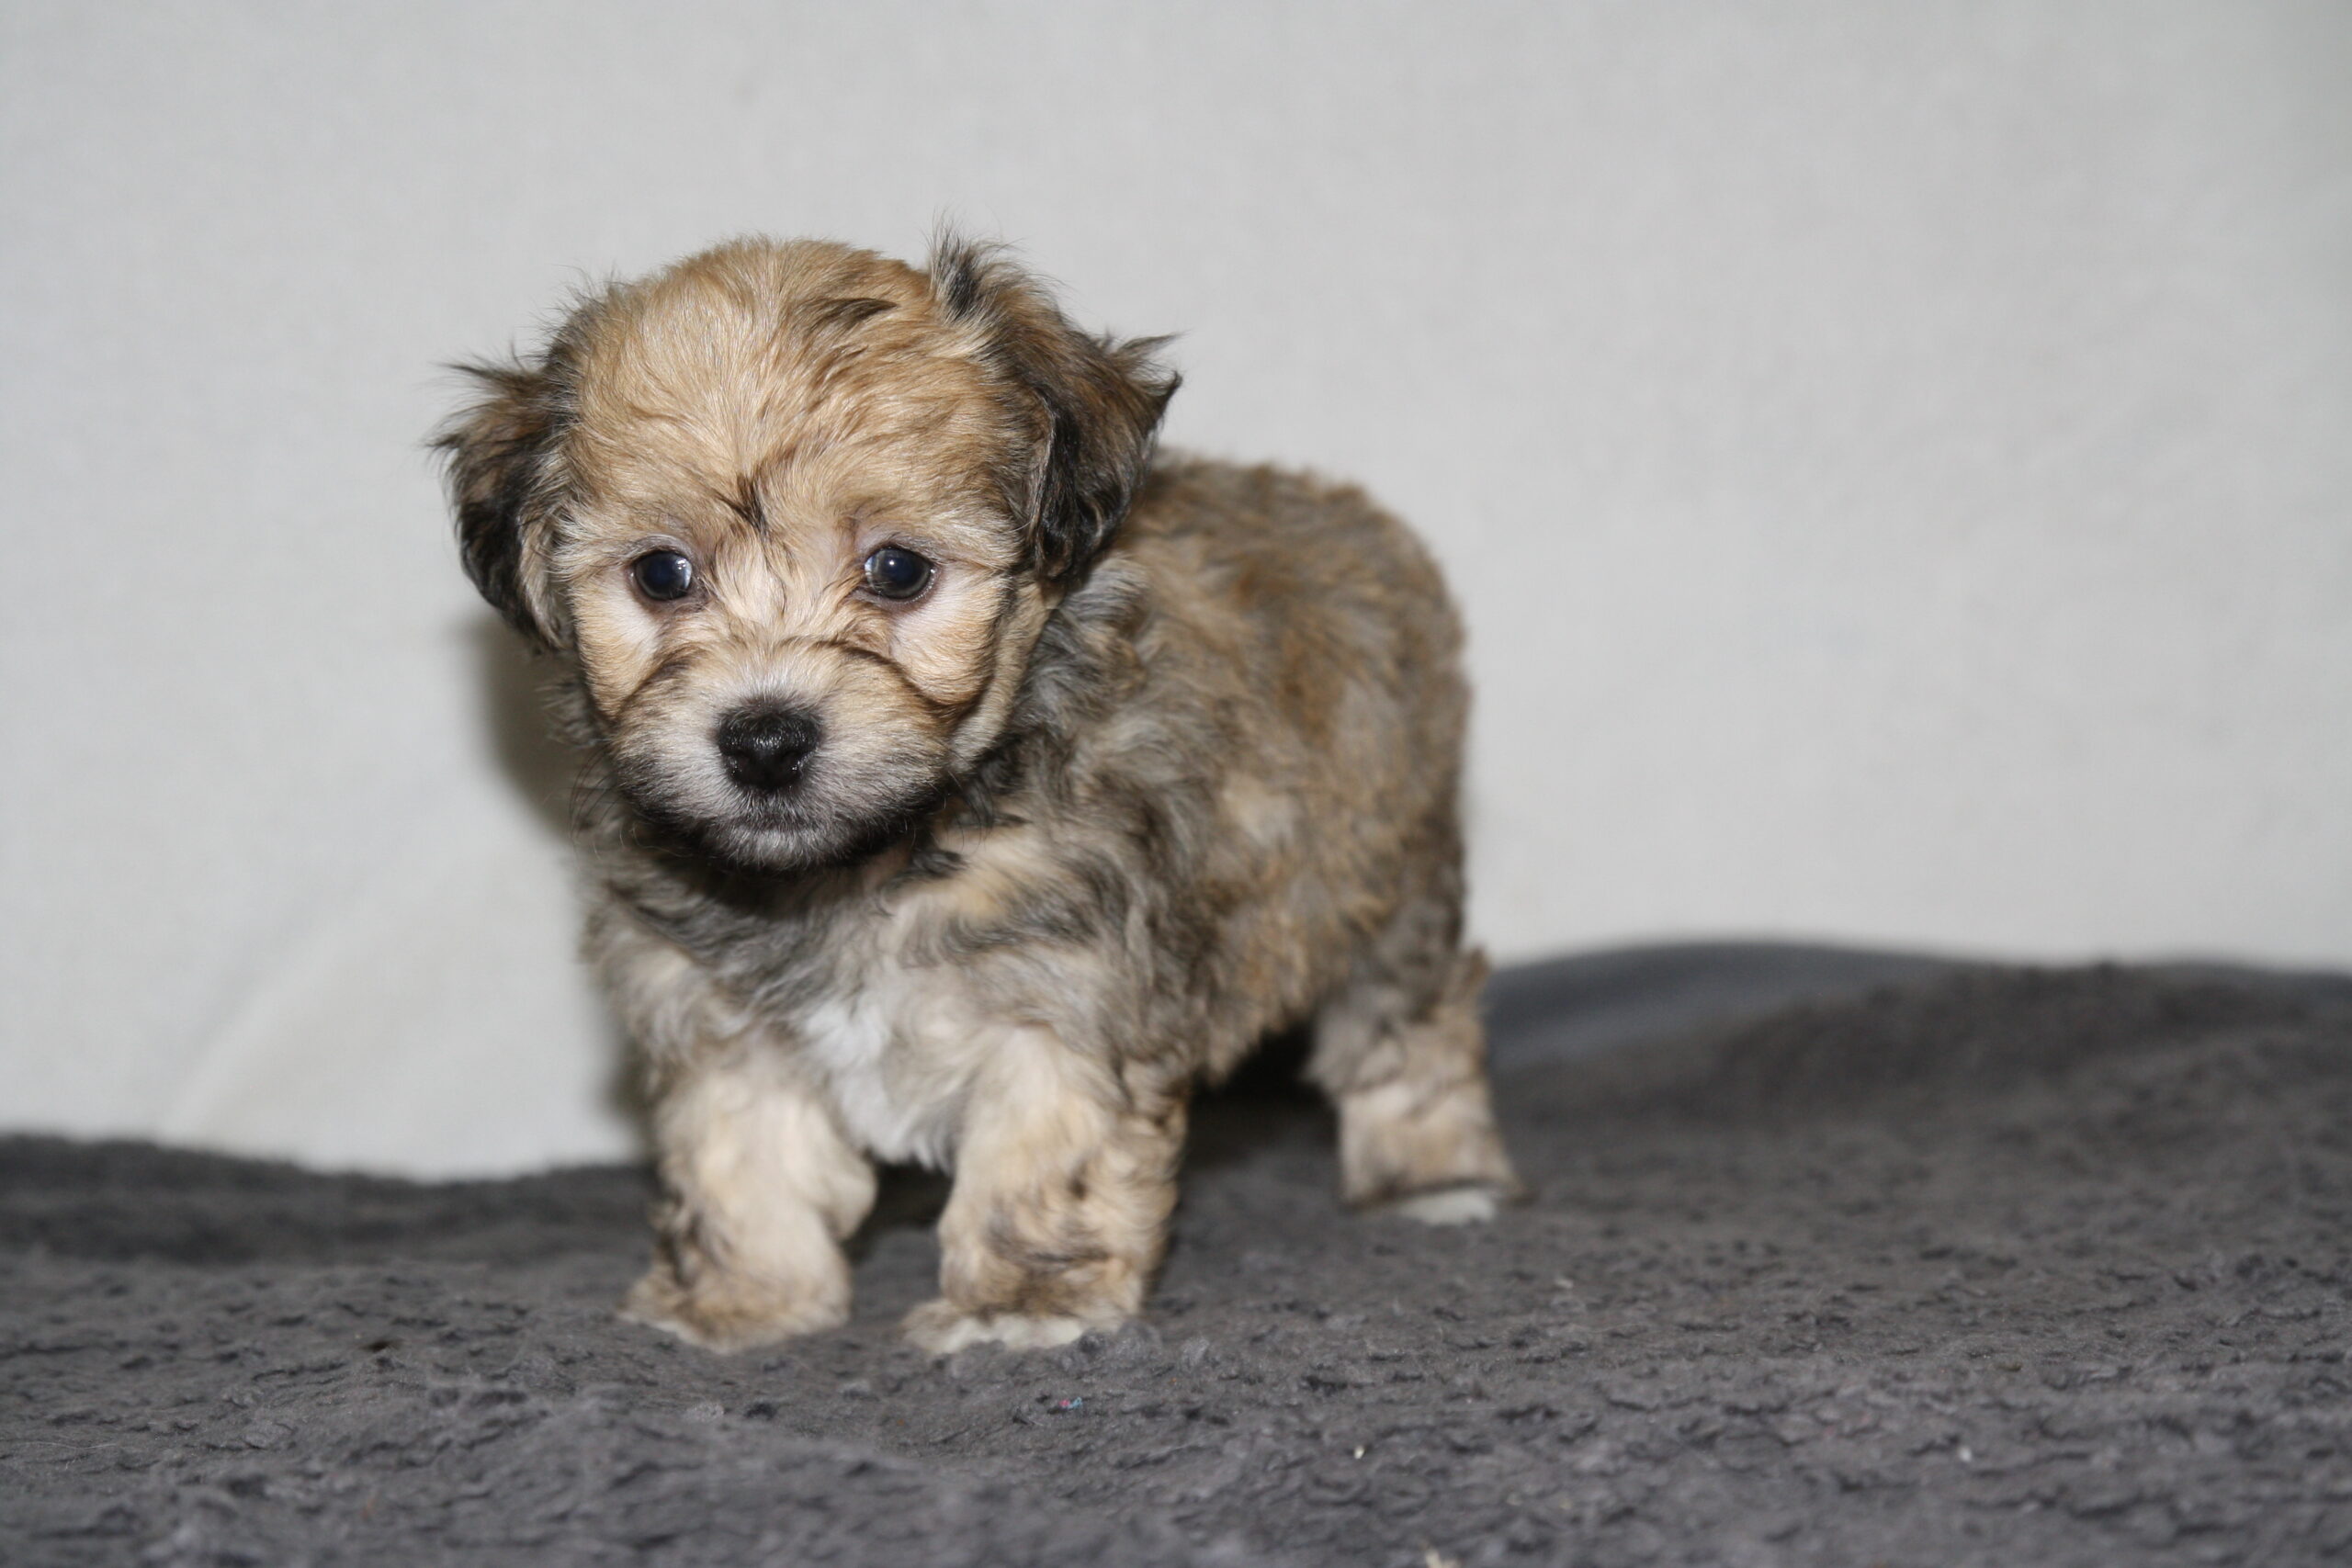 "Archie"  DOB: 7/24/2022
Breed: Havanese
Sex: Male
Availability: Ready to go home.
Price: $1500